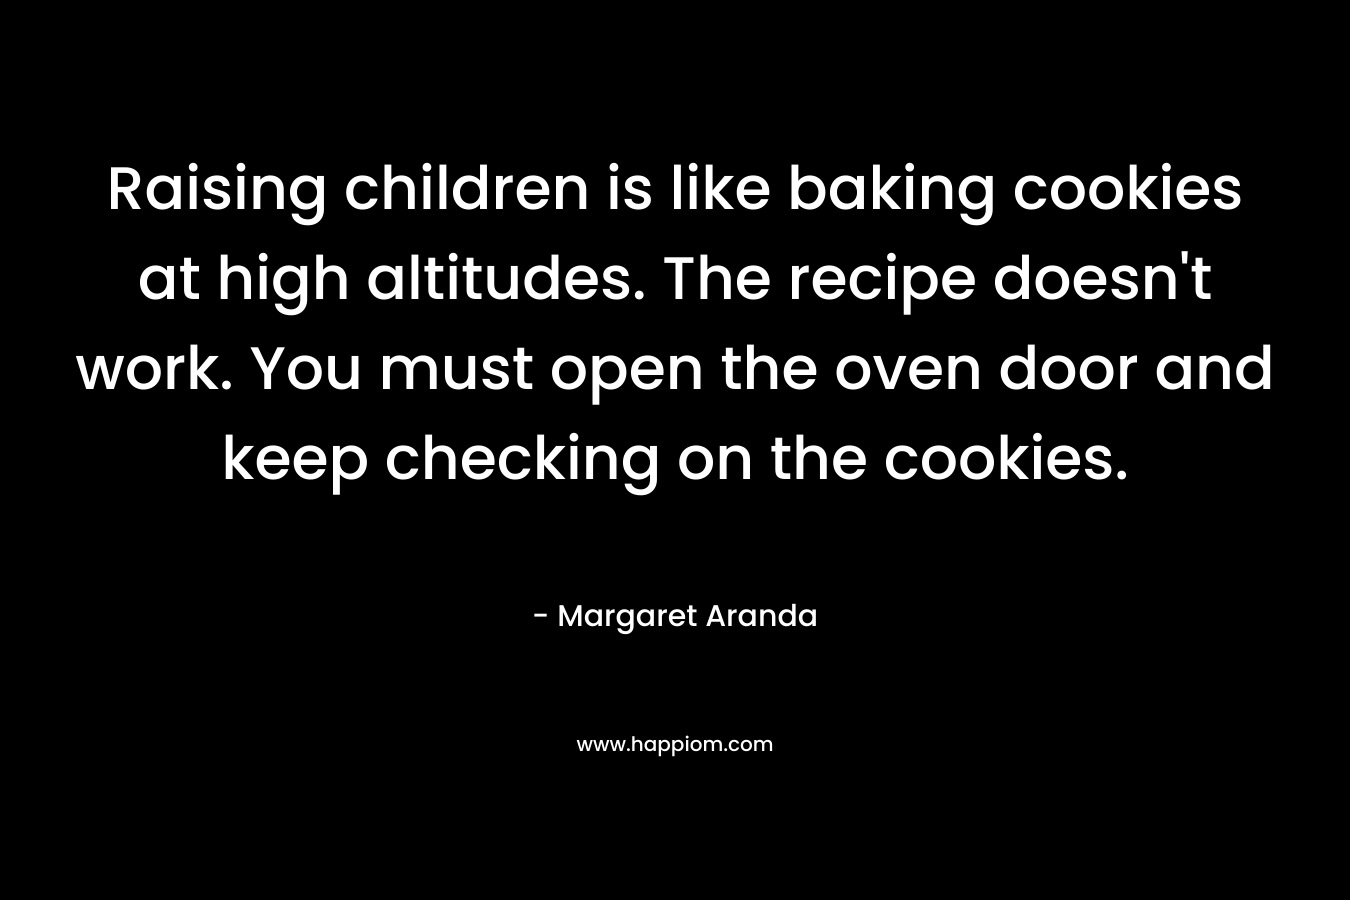 Raising children is like baking cookies at high altitudes. The recipe doesn't work. You must open the oven door and keep checking on the cookies.